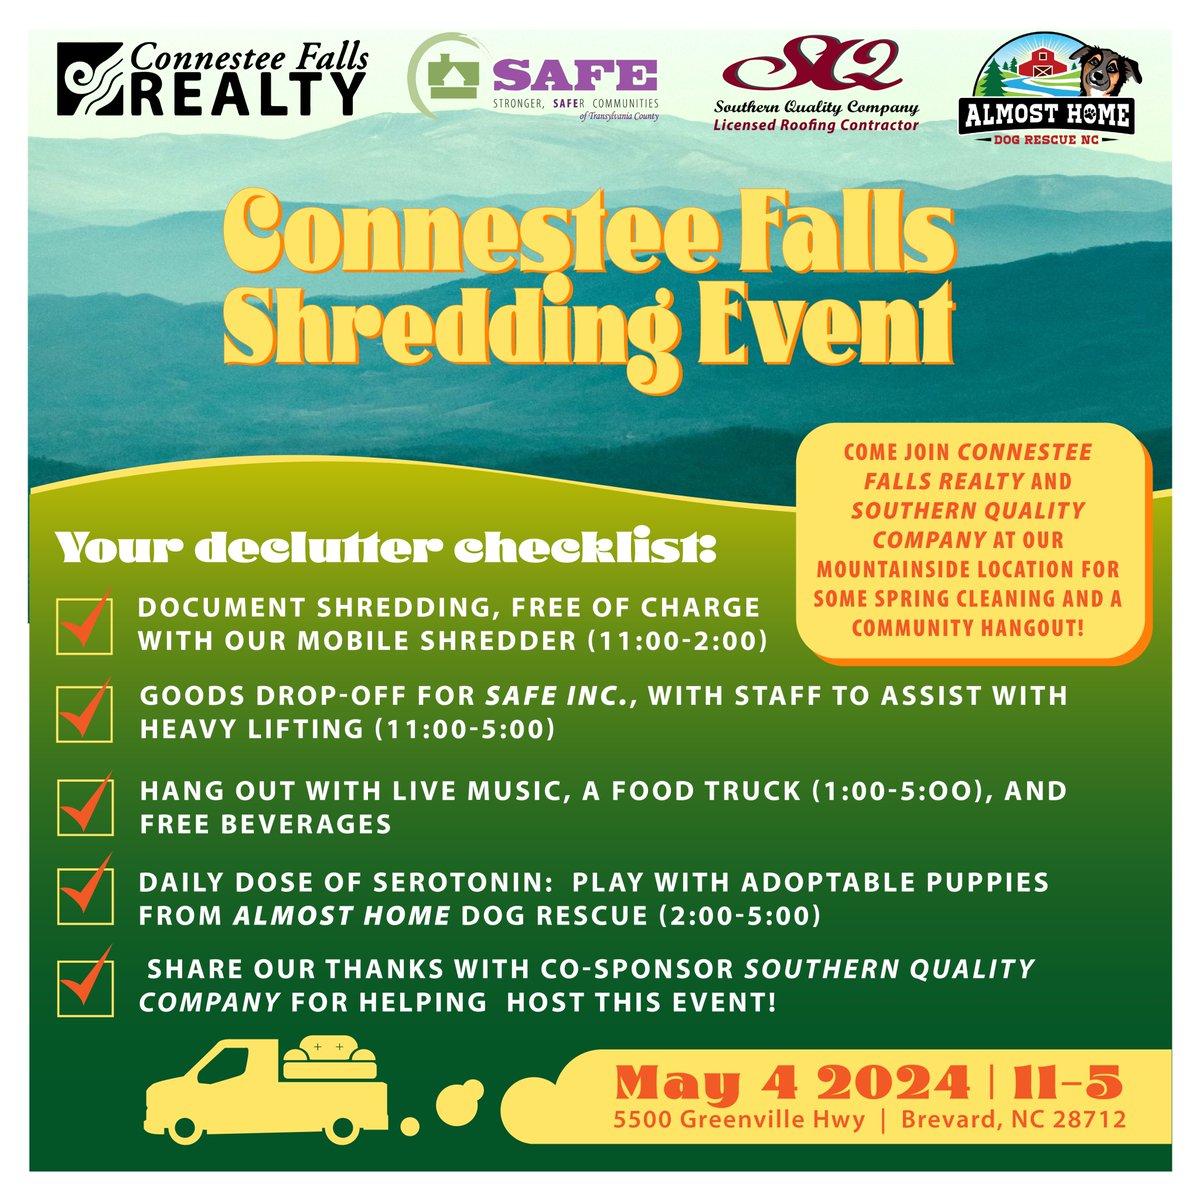 We are so excited to partner with Connestee Falls Realty for this day of shredding, donations, music, food, and more! Be sure to come out Saturday, May 4th!

#brevardnc #transylvaniacounty